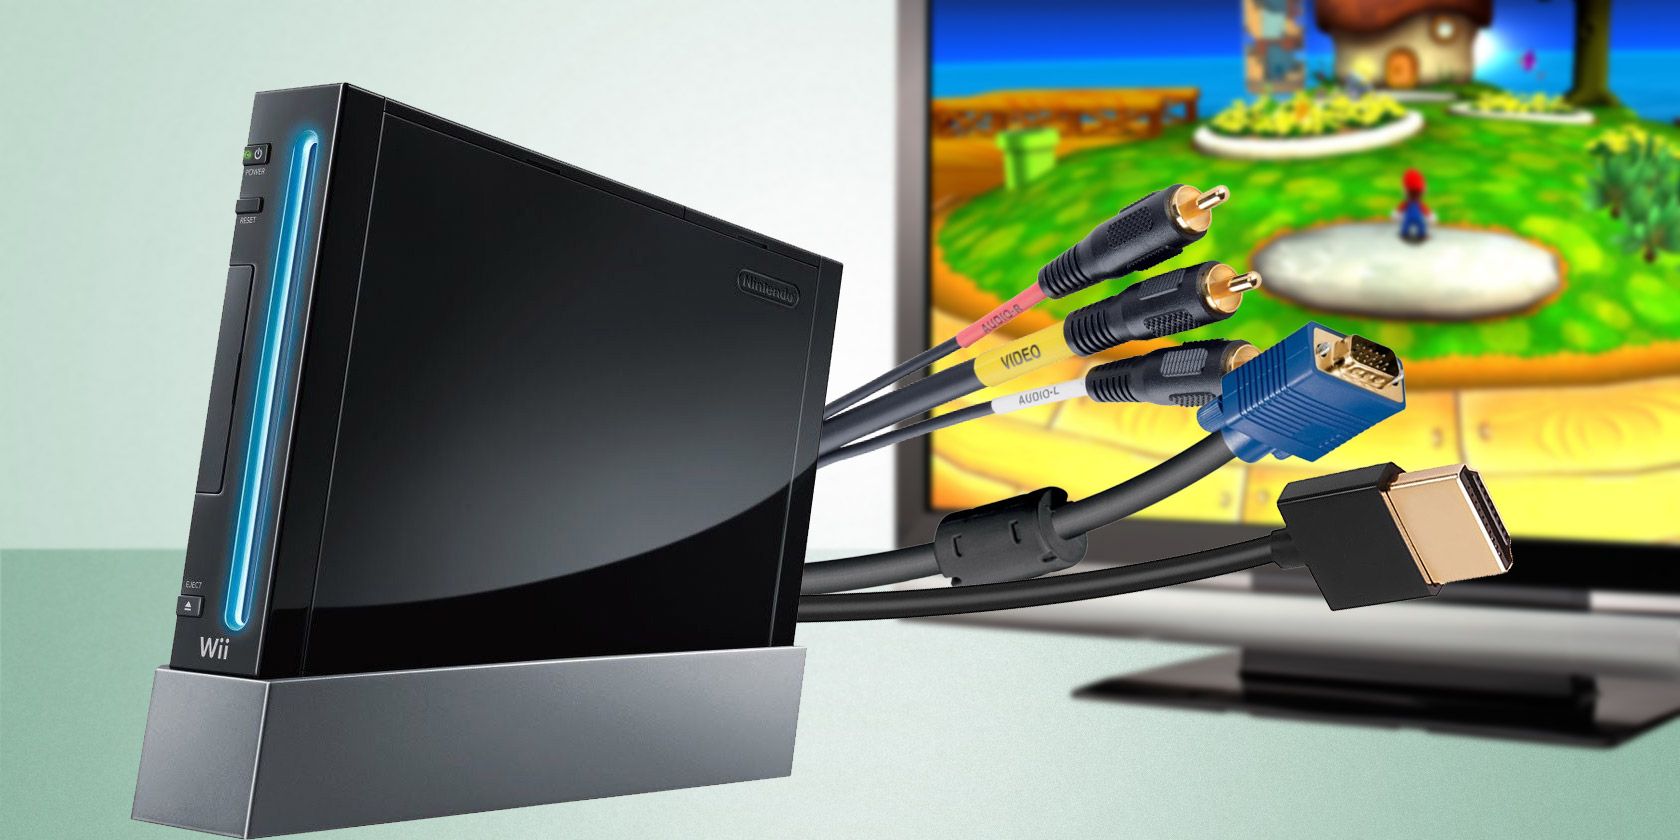 6 Ways to Connect Your Nintendo Wii to Any Type of TV